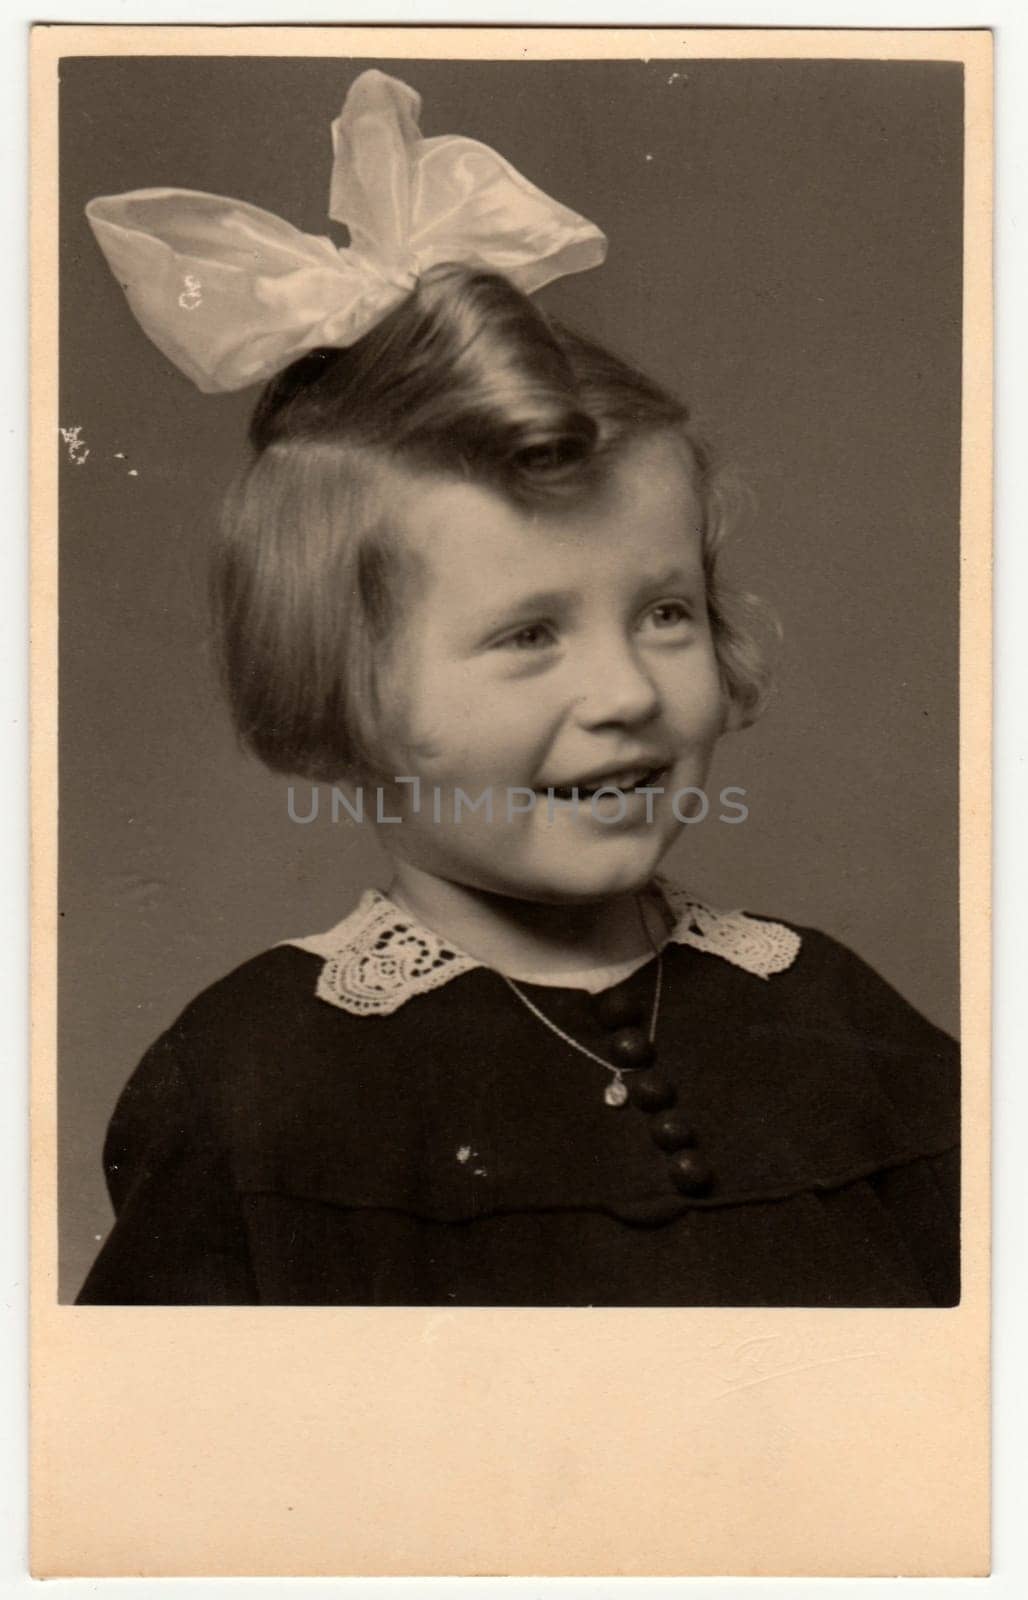 Vintage photo shows a portrait of a small cute girl with ribbon in hair. Circa 1950s. by roman_nerud